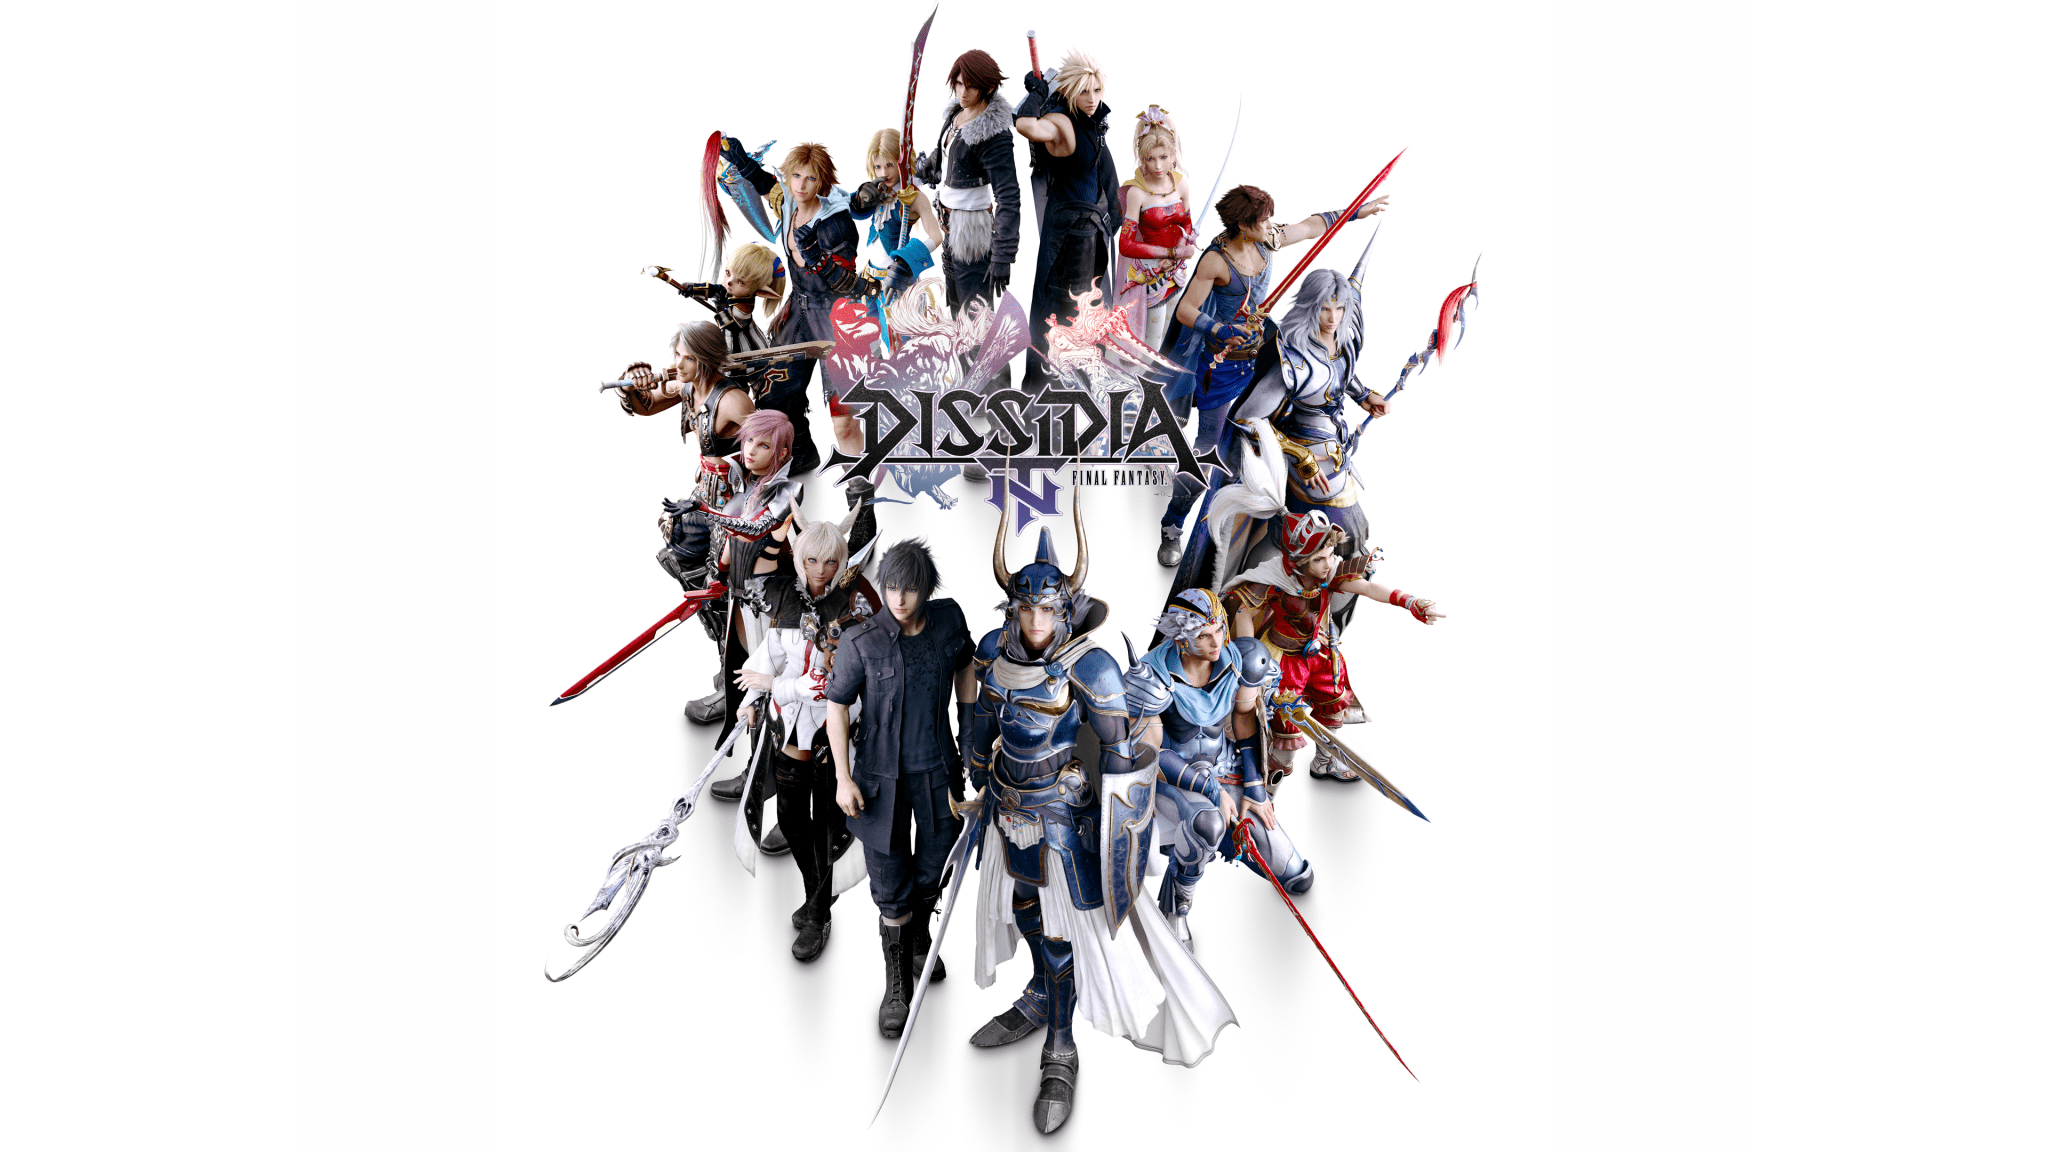 DISSIDIA FINAL FANTASY NT Free Edition available today